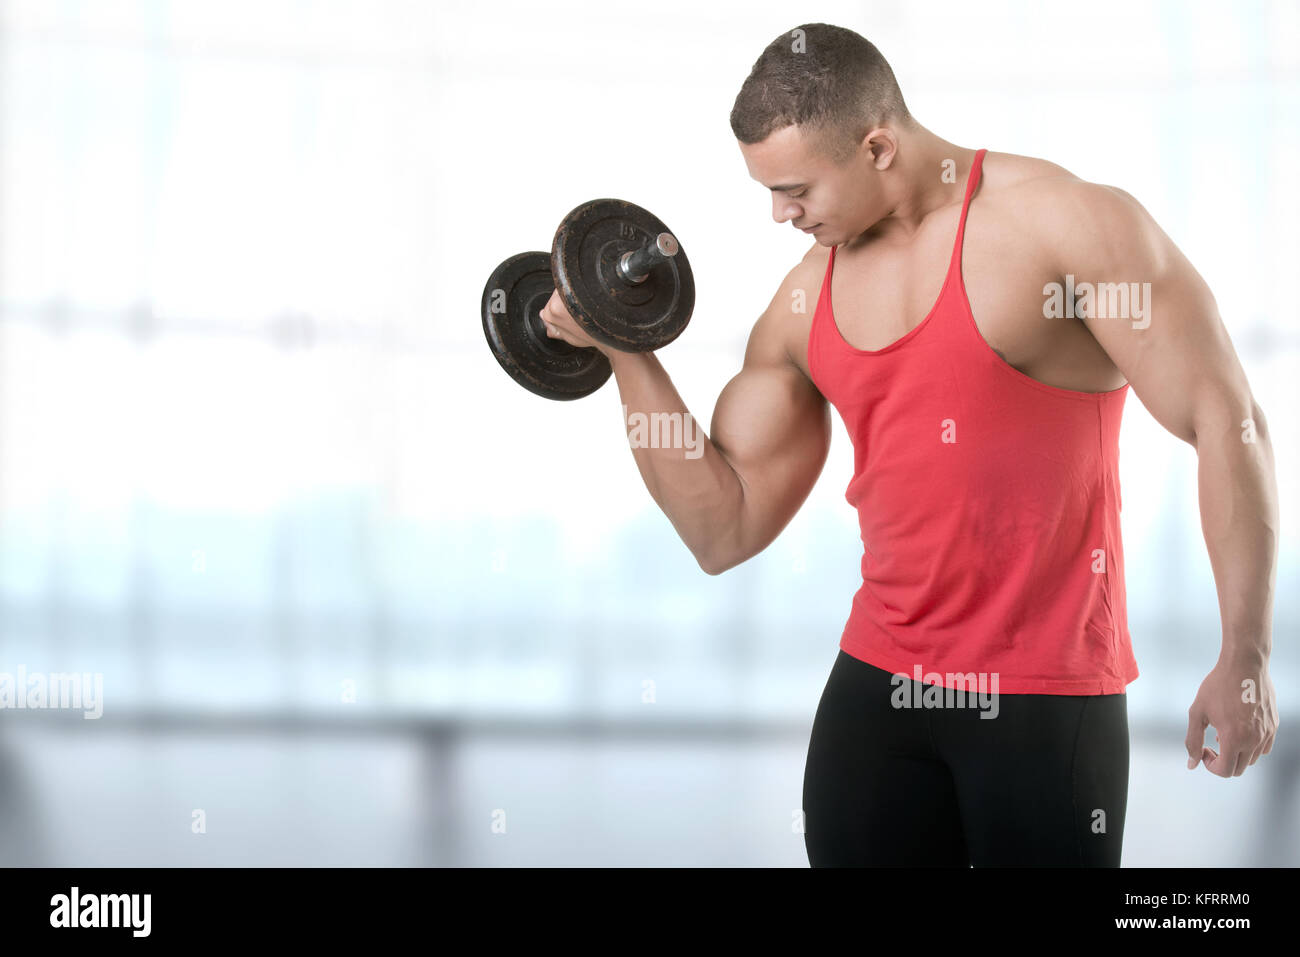 Fit athlete doing standing dumbbell curls for training his biceps, in a blue background Stock Photo